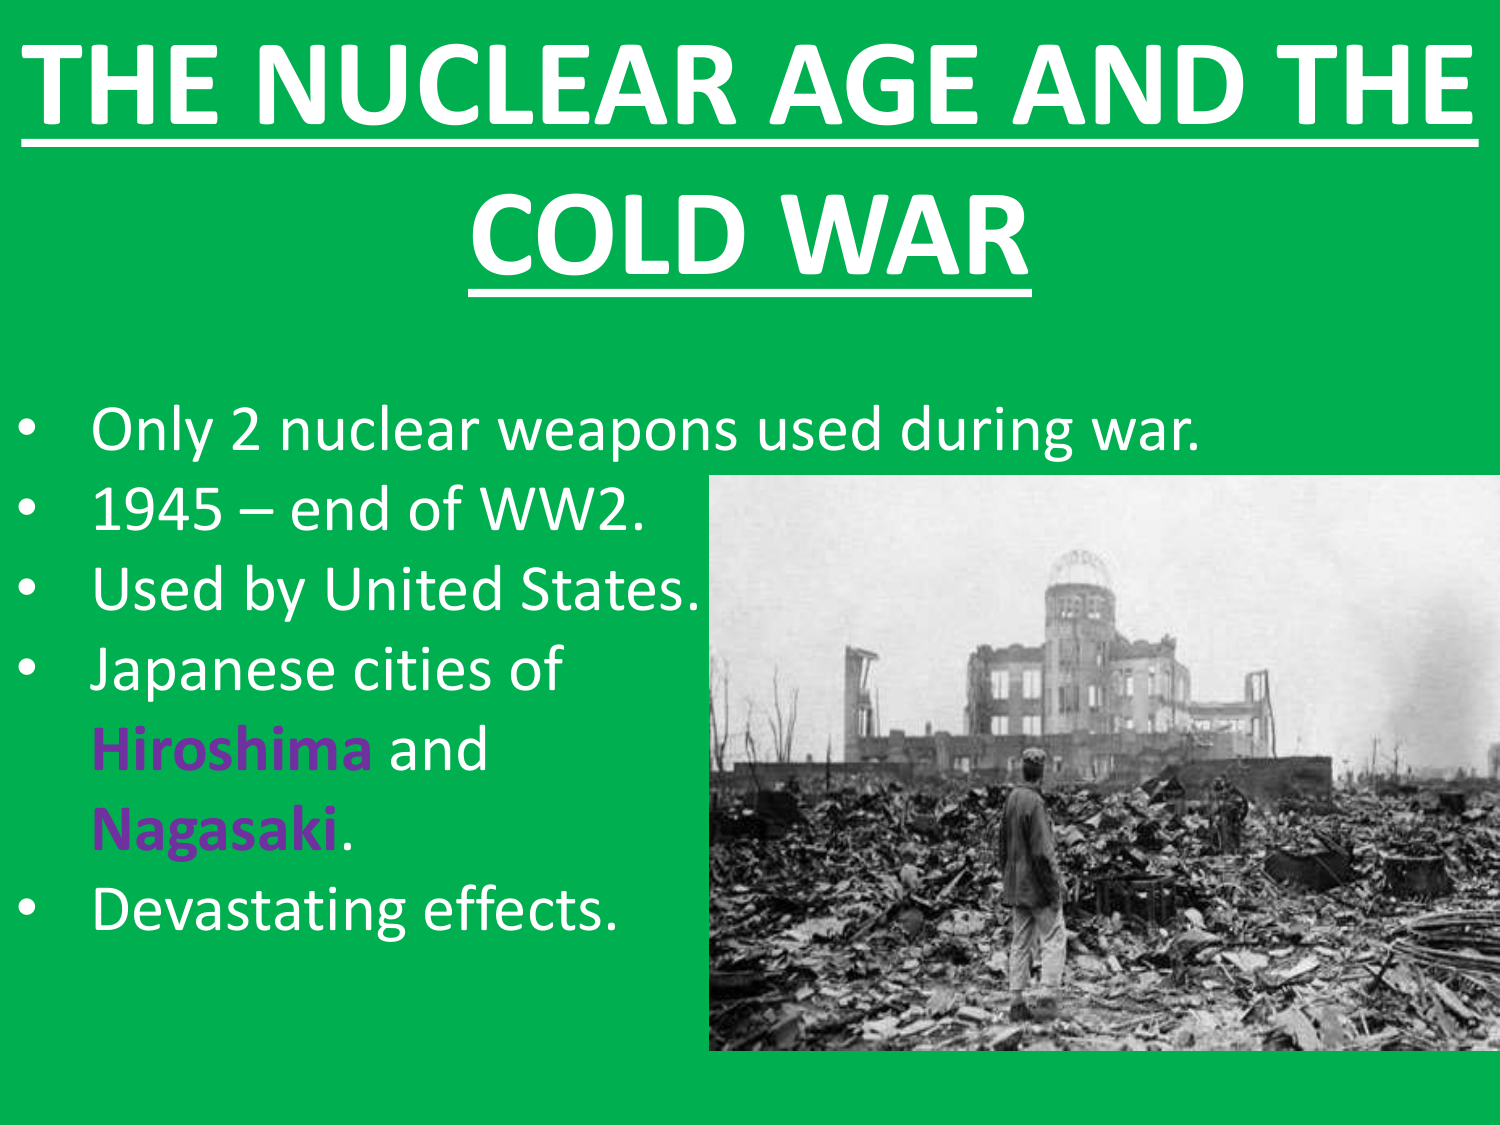 the nuclear age and the cold war essay